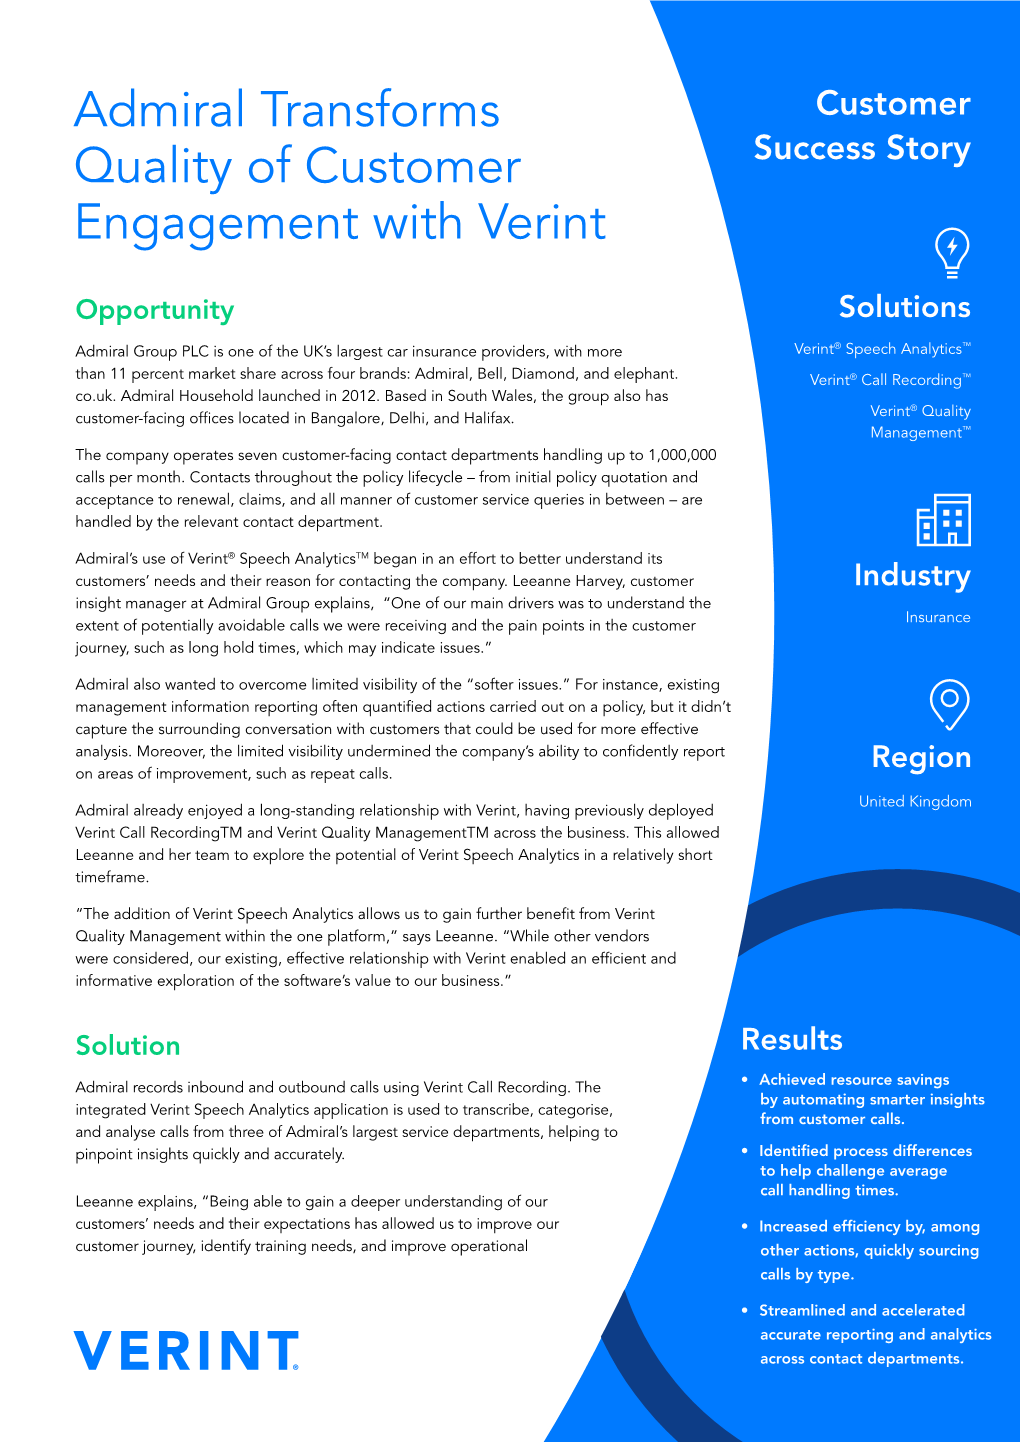 Admiral Transforms Quality of Customer Engagement with Verint